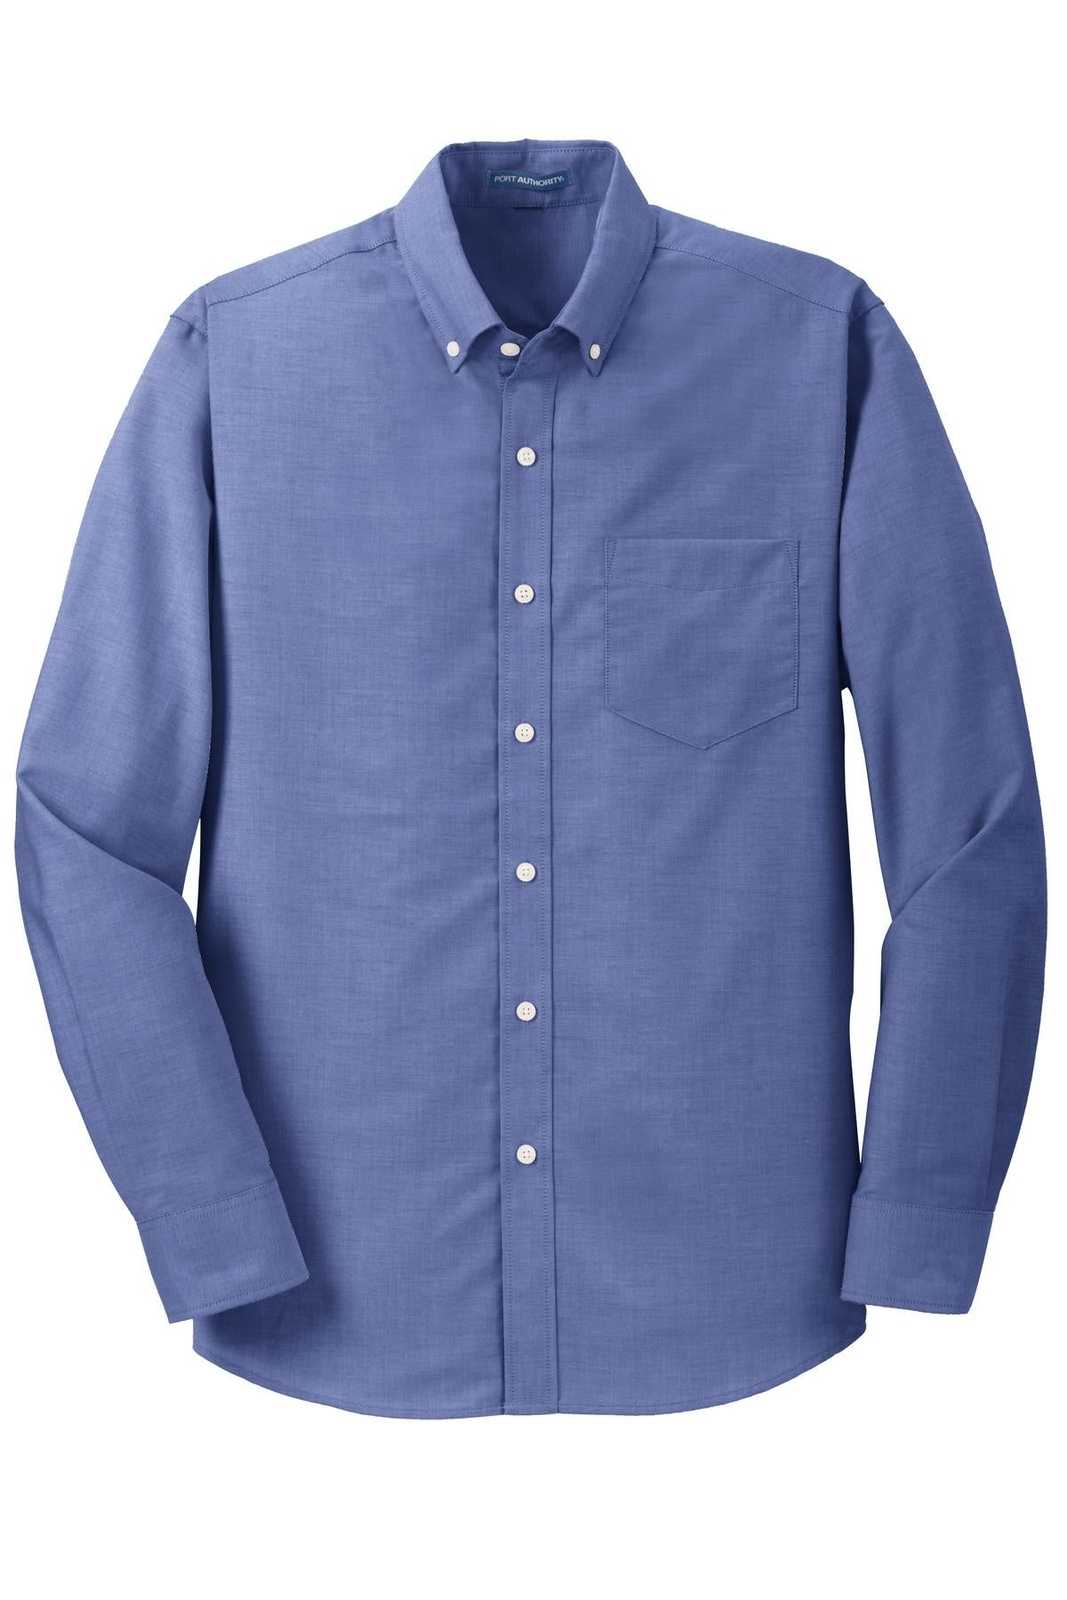 Port Authority S658 Superpro Oxford Shirt - Navy - HIT a Double - 5